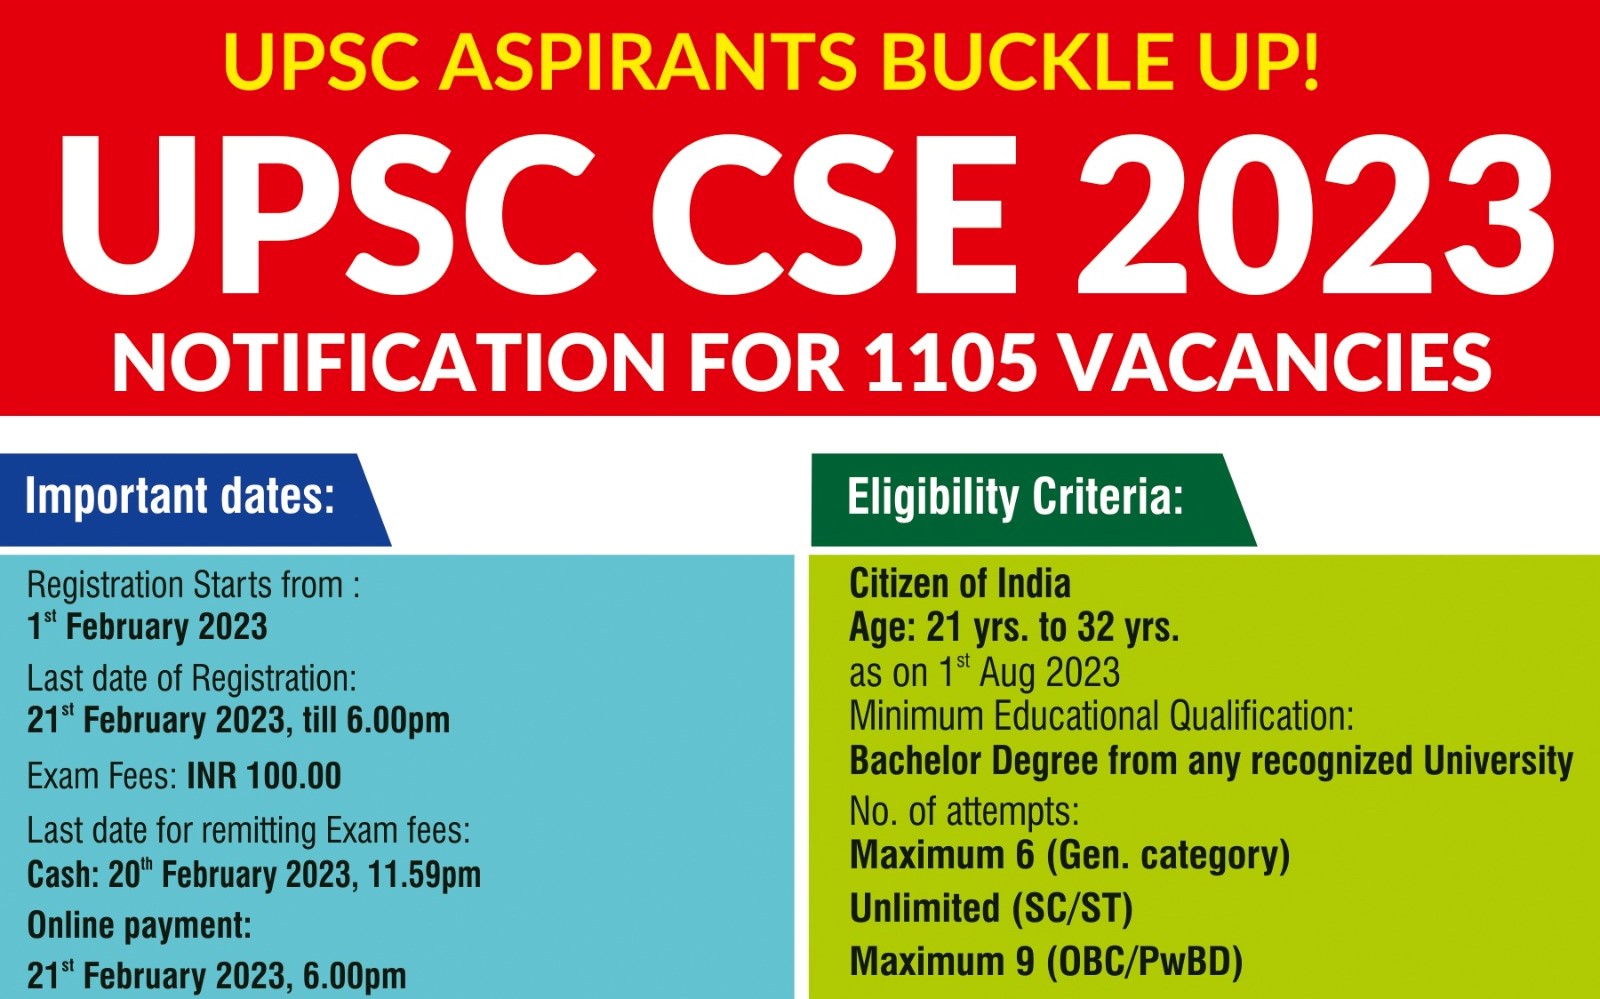 BREAKING NEWS: UPSC HAS RELEASED THE NOTIFICATION FOR CSE 2023